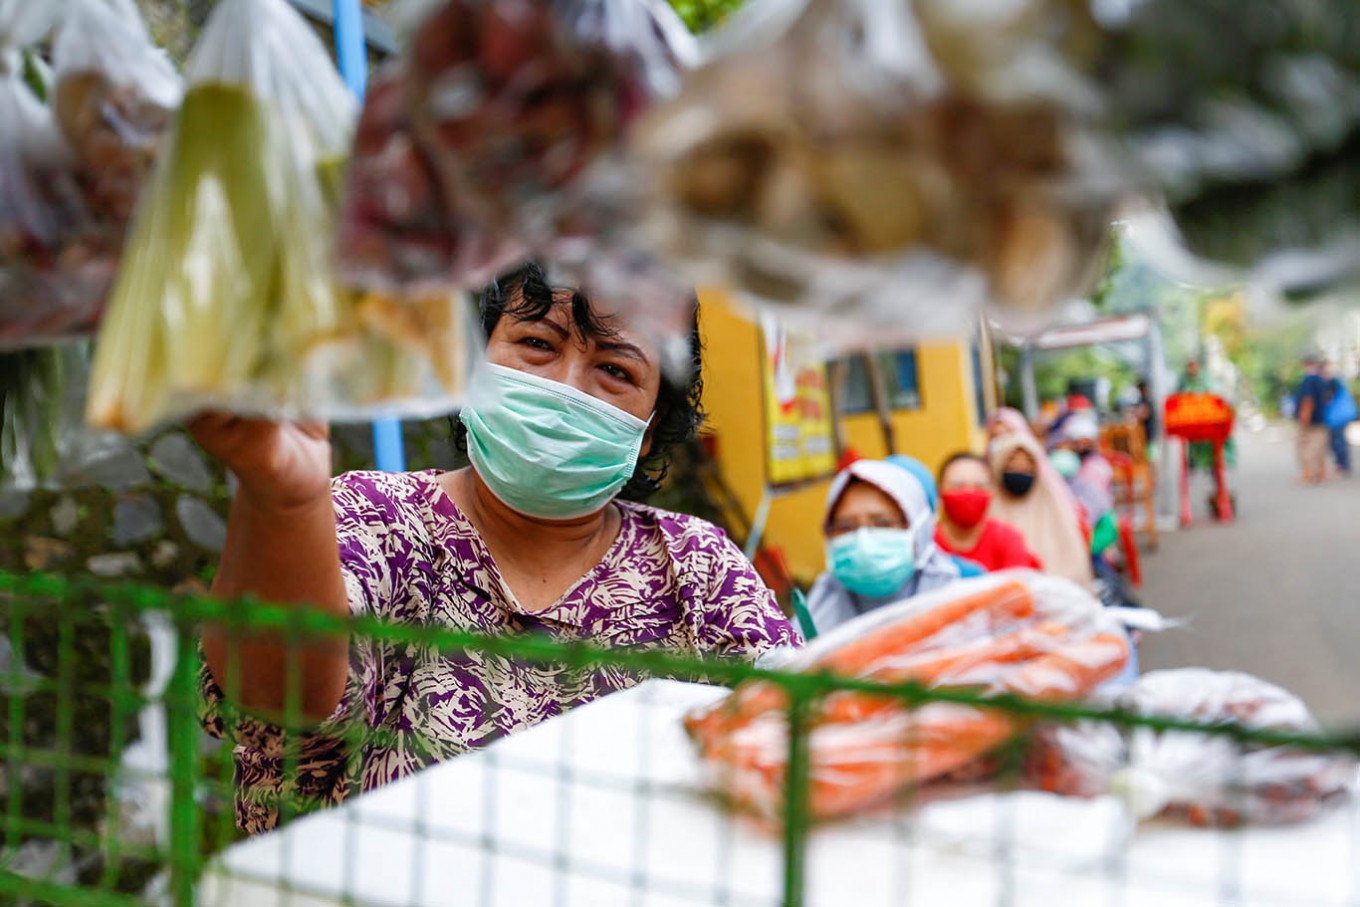 People practice physical distancing while buying vegetables amid the COVID-19 outbreak in Depok, West Java, on April 28. (REUTERS/Ajeng Dinar Ulfiana)